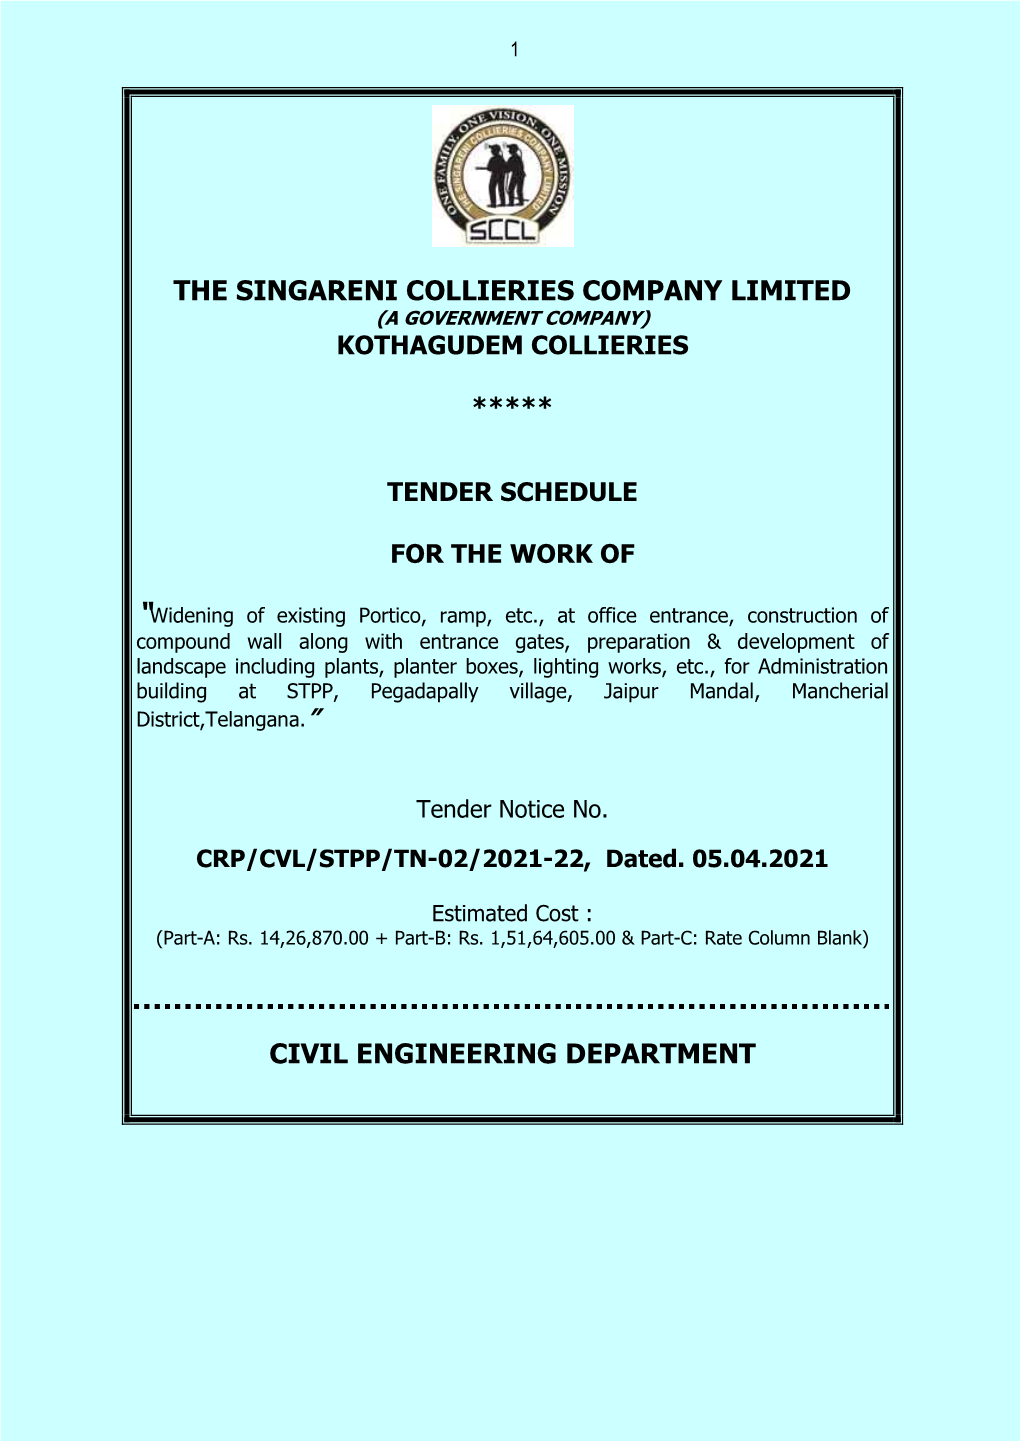 The Singareni Collieries Company Limited (A Government Company) Kothagudem Collieries